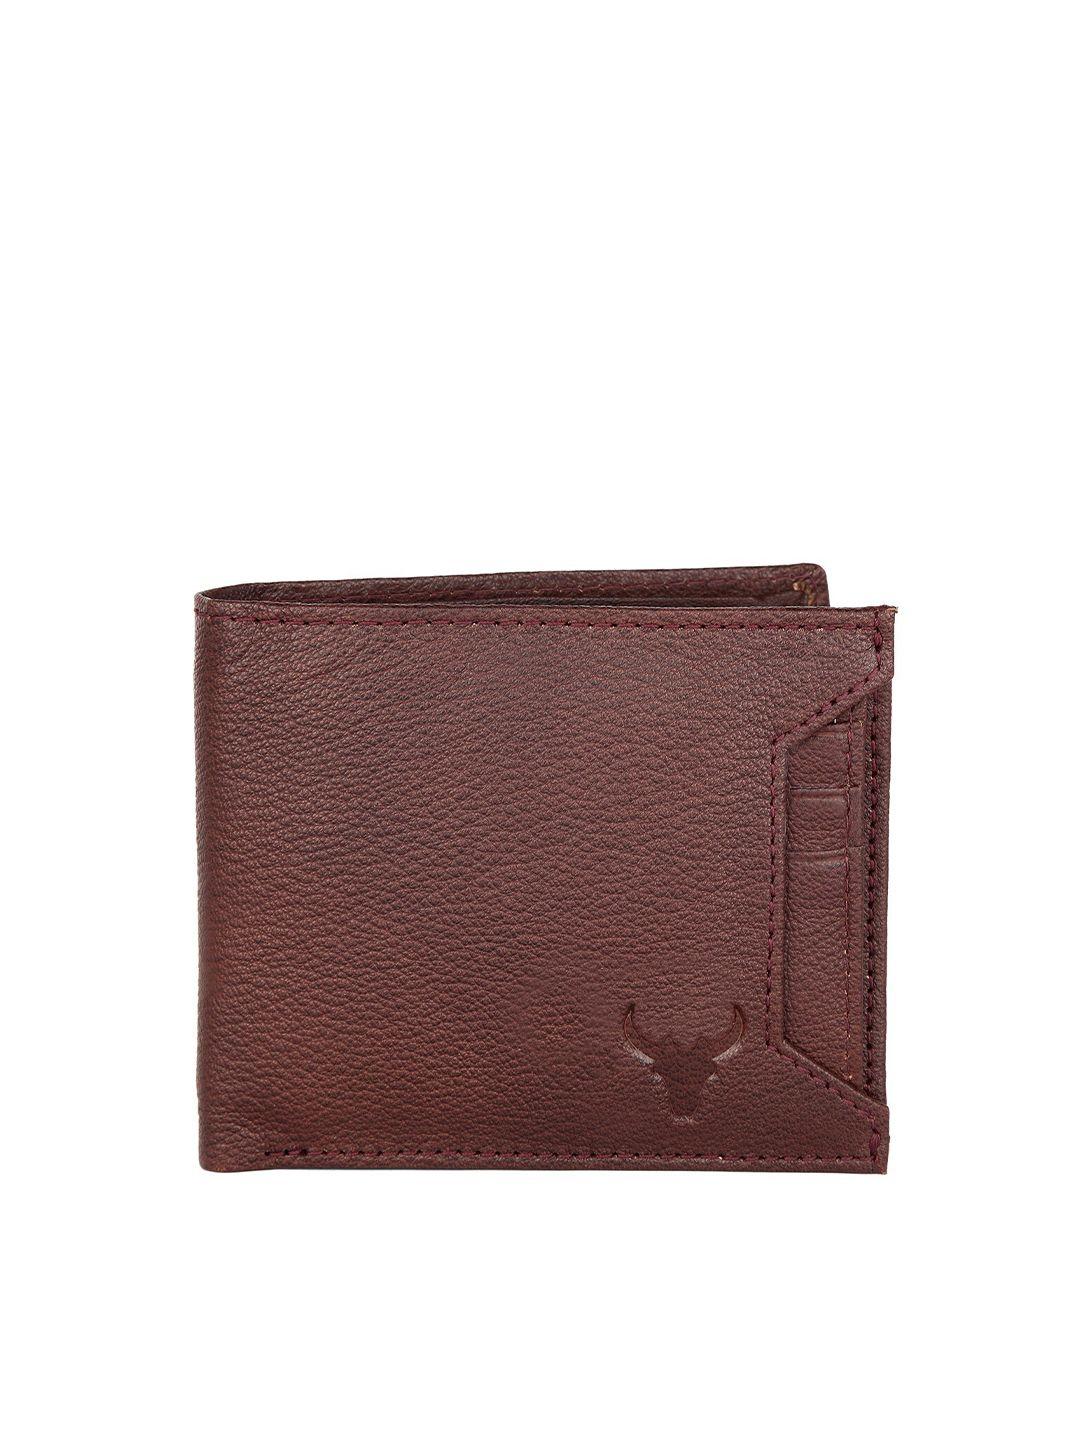 napa hide men maroon solid leather two fold wallet with rfid